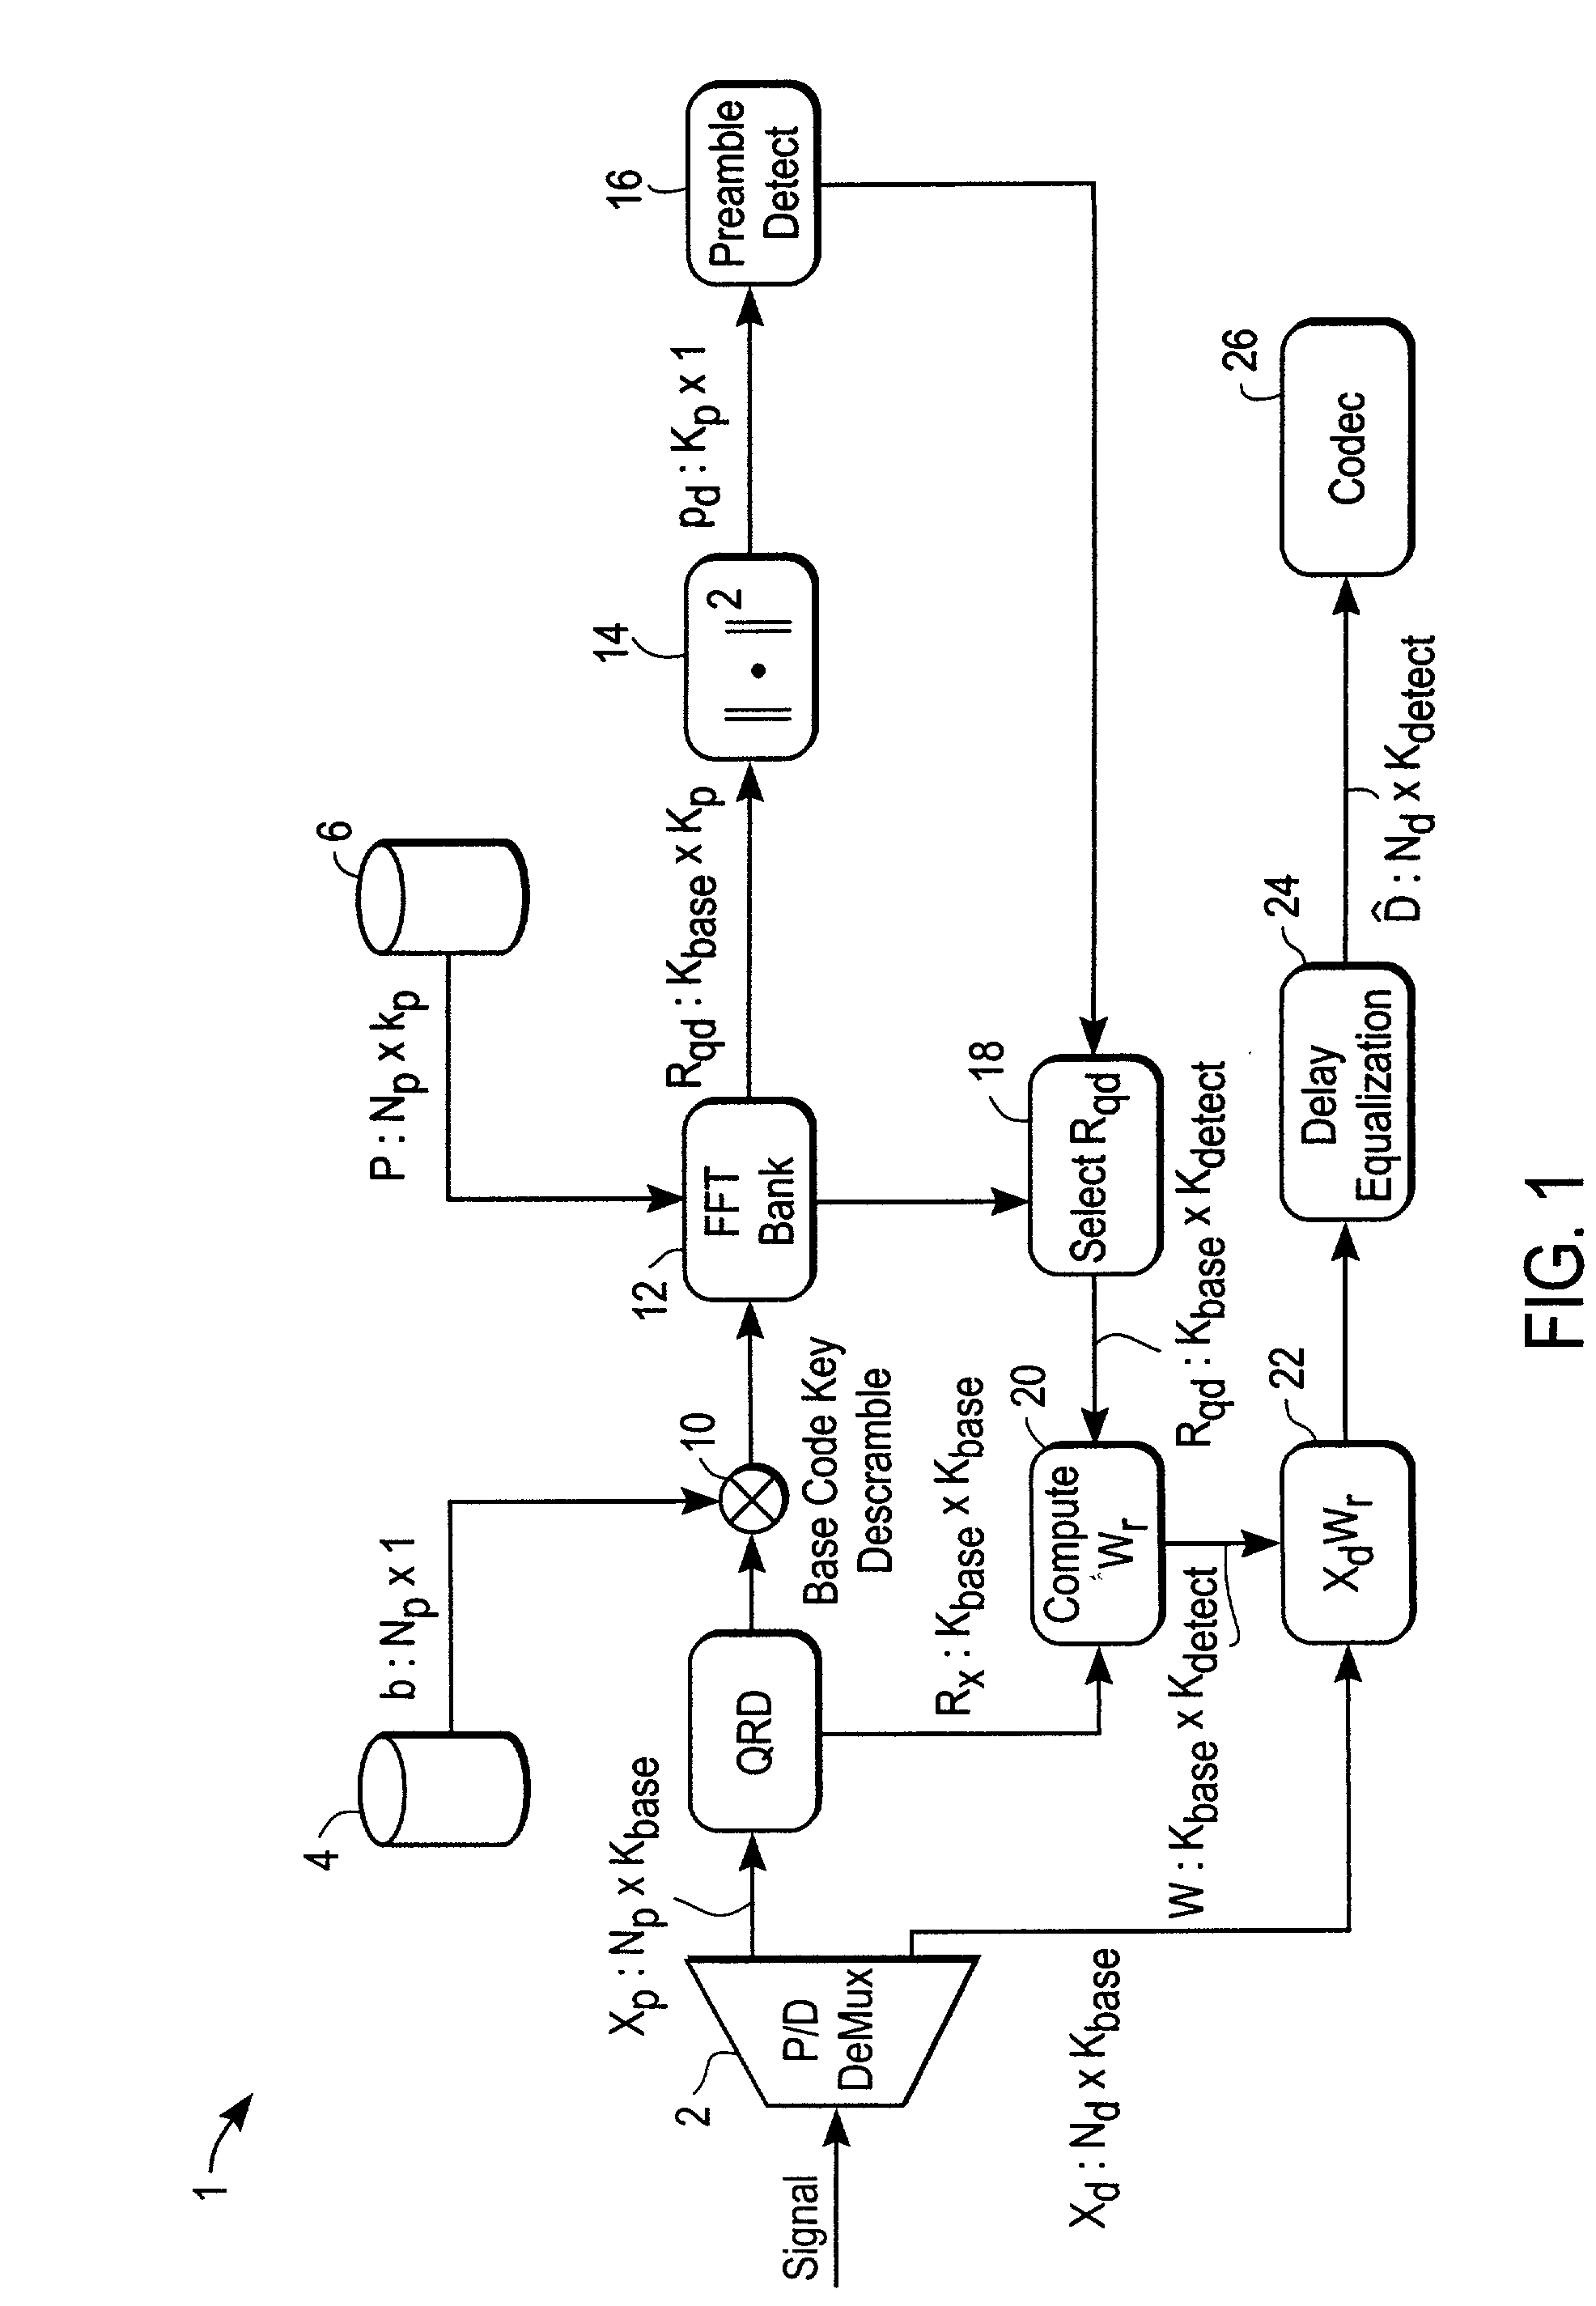 Adaptive communications methods for multiple user packet radio wireless networks